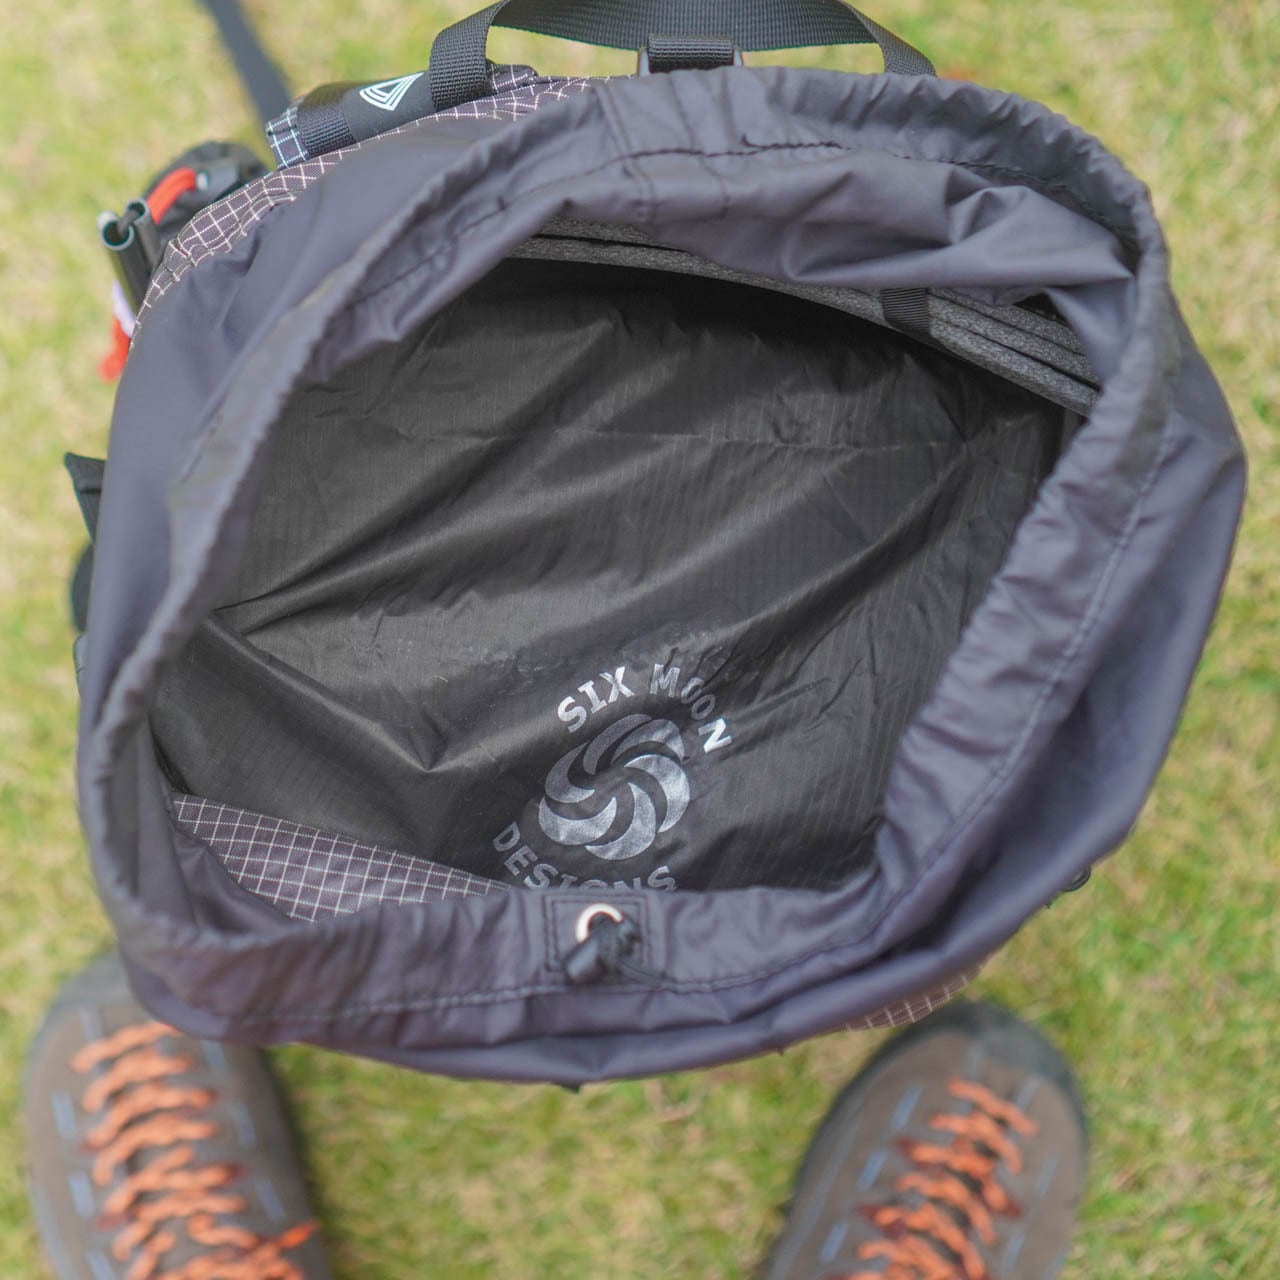 SIX MOON DESIGNS Pack Pod Set Carbon | minimalize gears onlineshop powered  by BASE